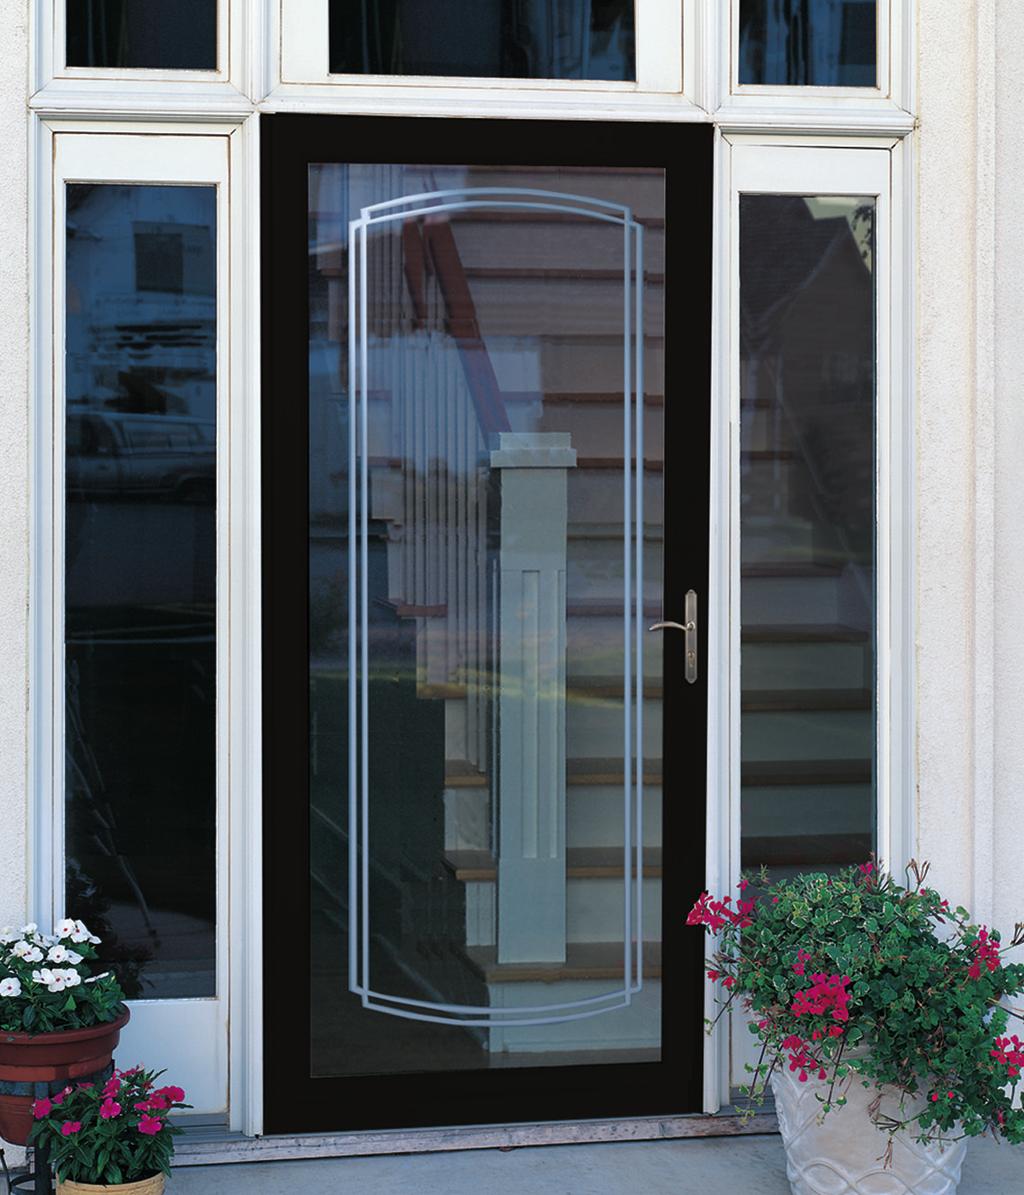 ides screen discreetly in top half of H door Protects your entry door rovides ventilation and protection P from outside